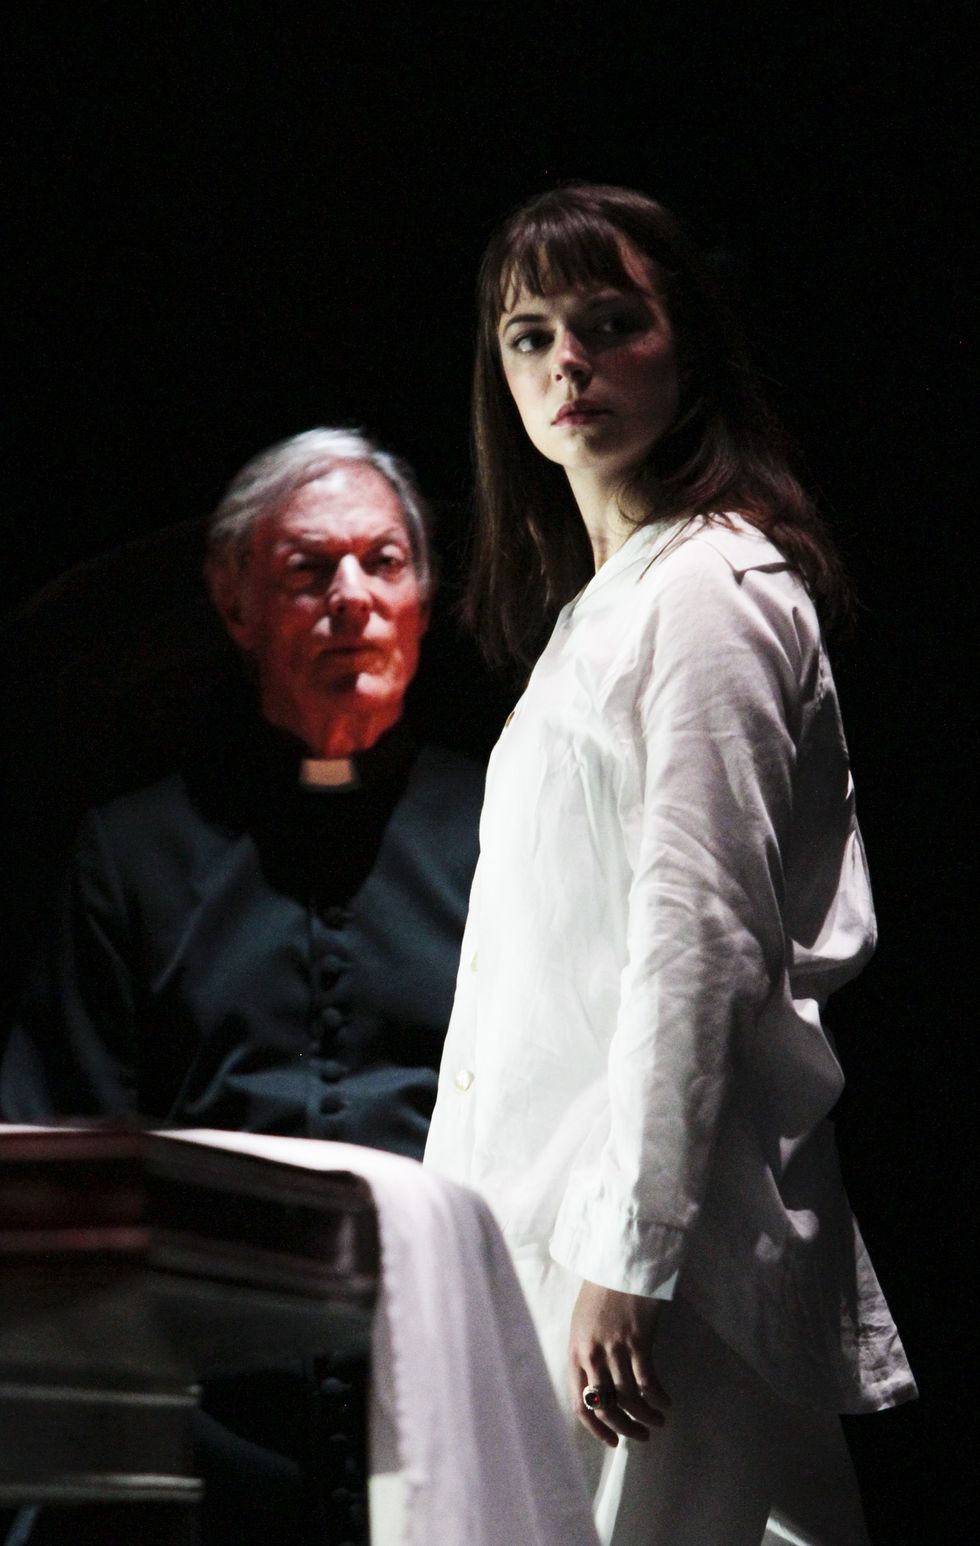 regan macneil played by emily yetter walks in a trance as father merrin played by richard cham